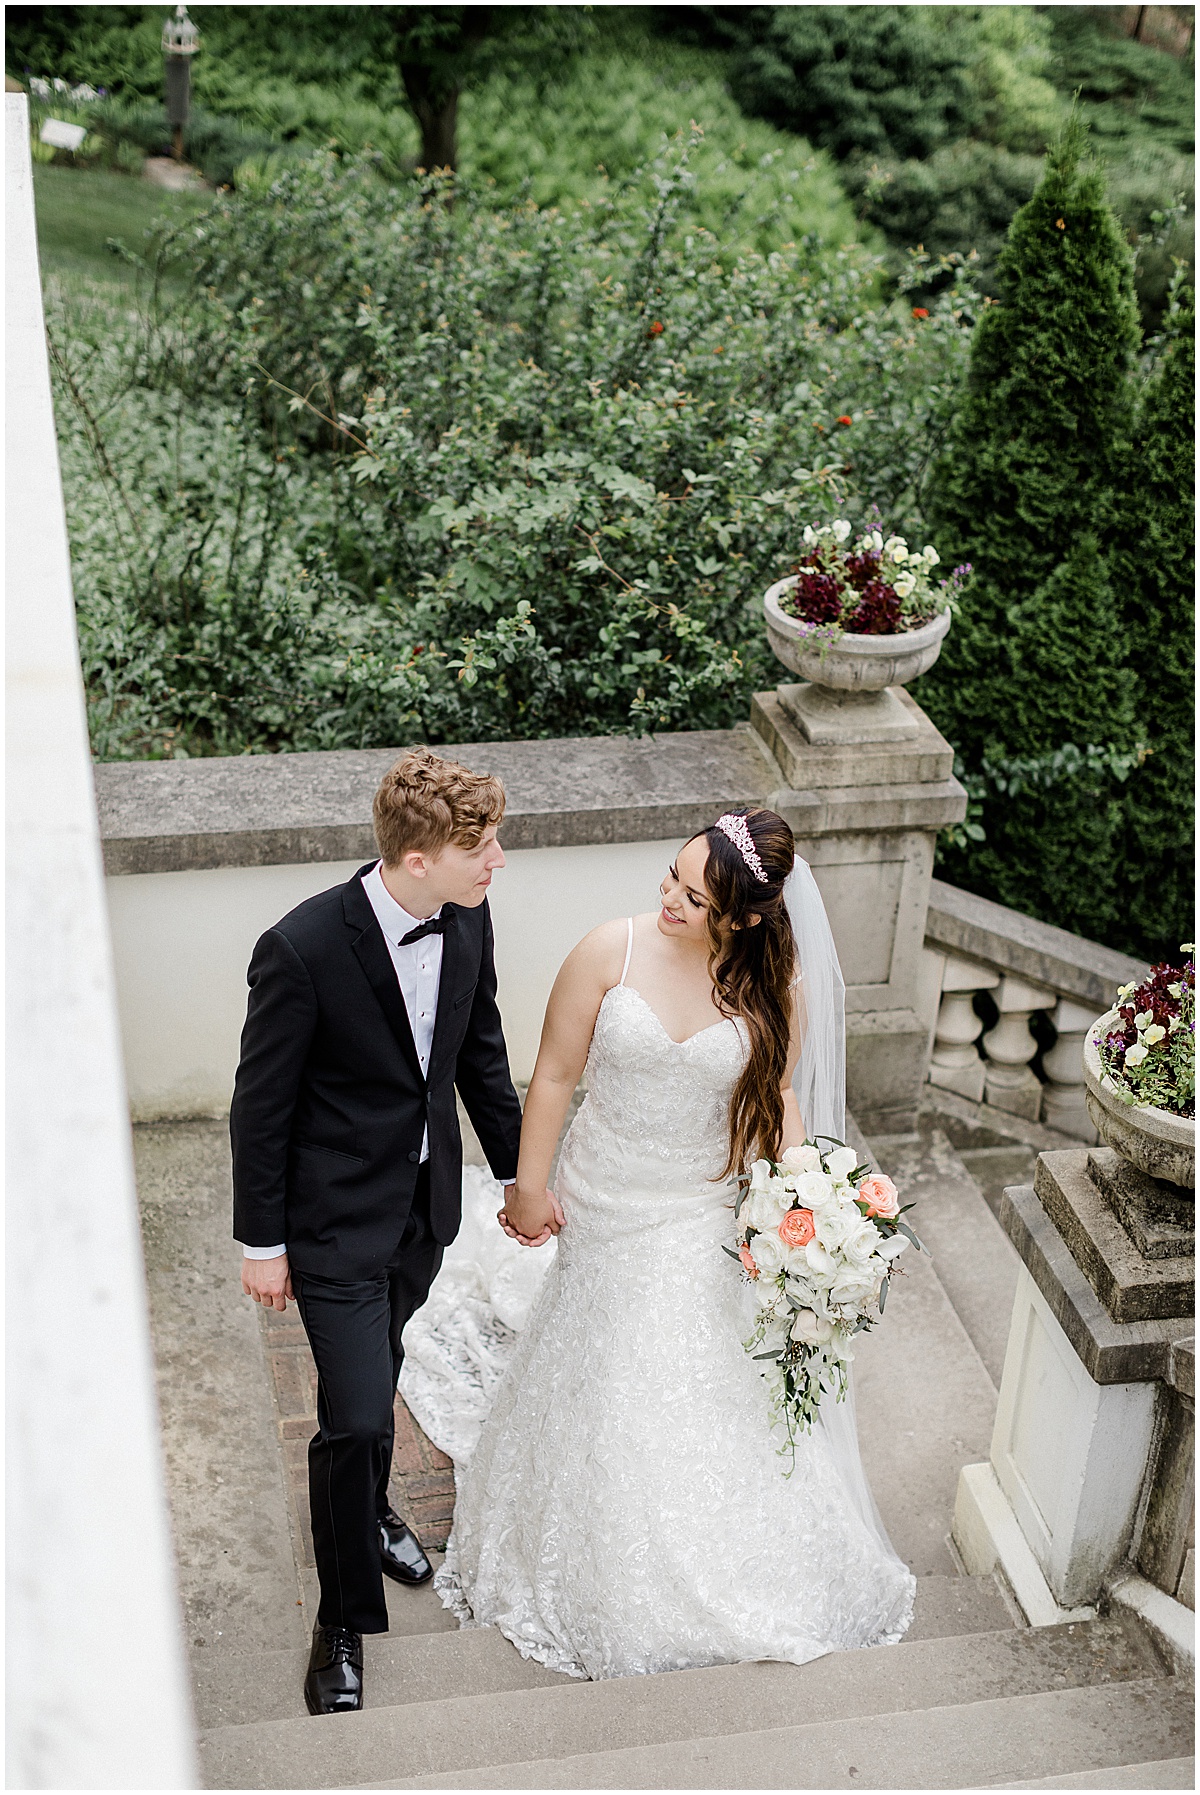 Classic church wedding in Indianapolis , Indiana and portraits at Newfields in Indianapolis captured by Kaitlin Mendoza Photography associate team